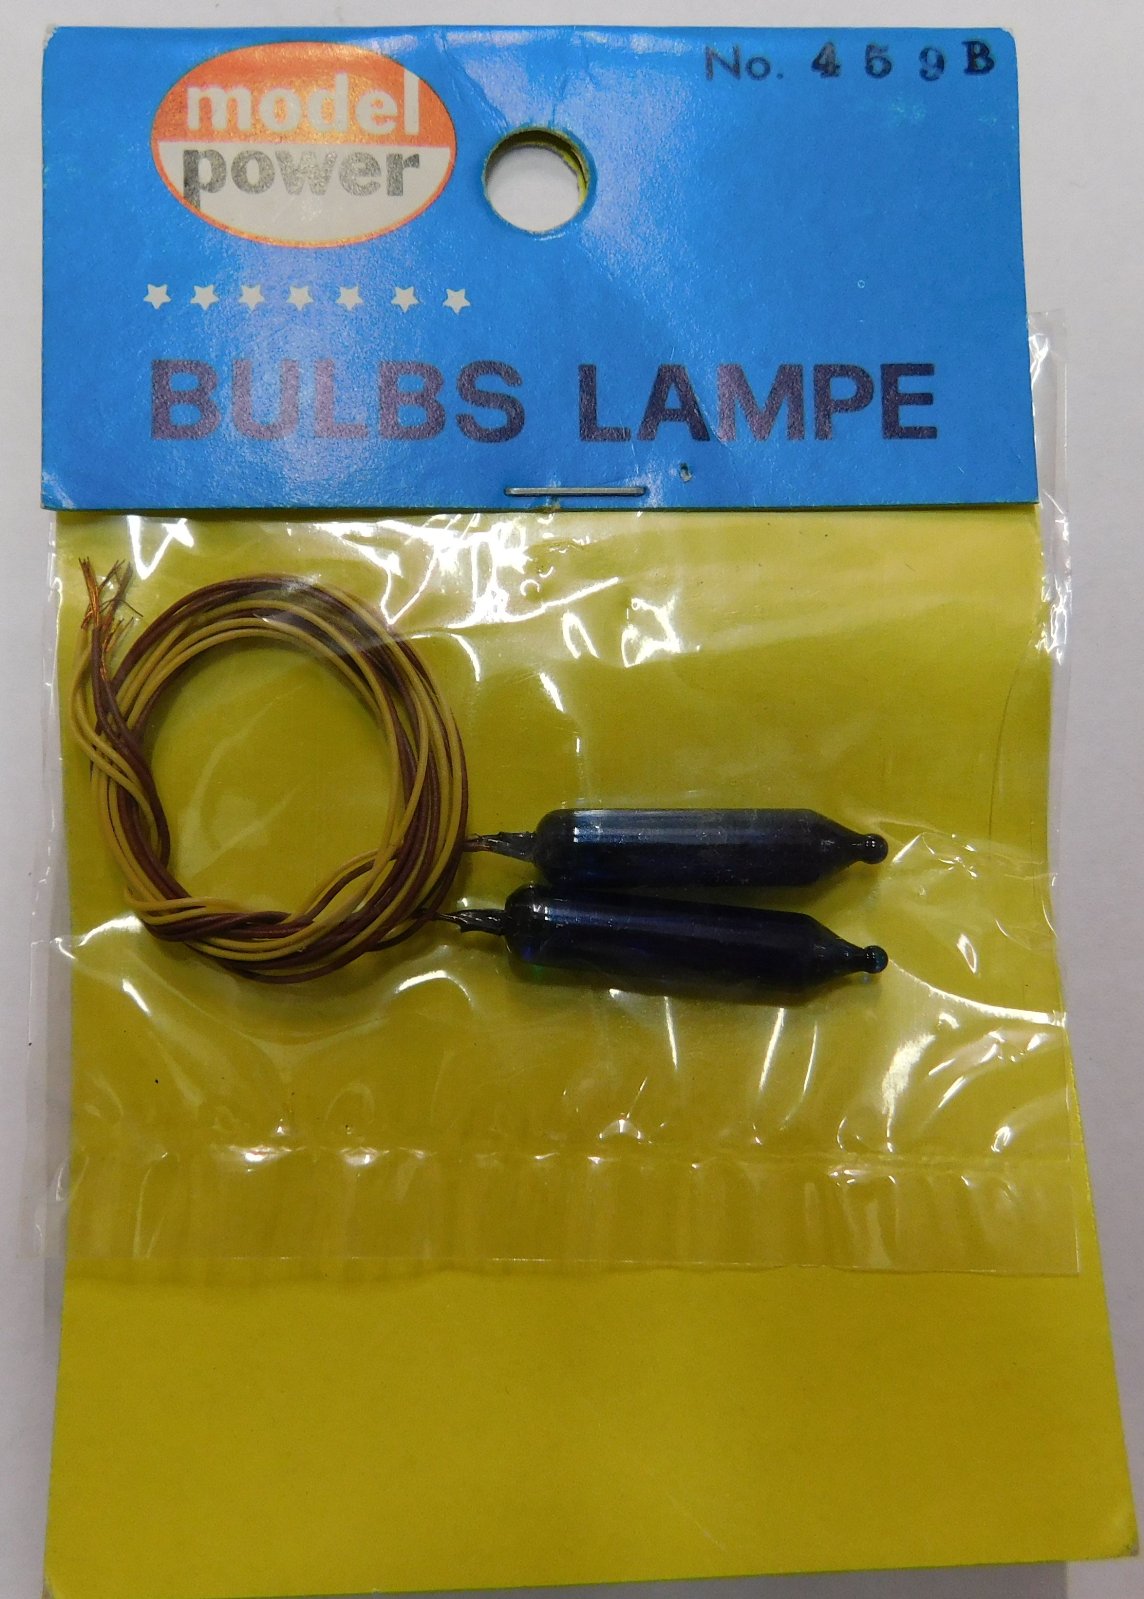 Model Power 459 Blue Flashing Light Bulb with Wires (Pack of 2)